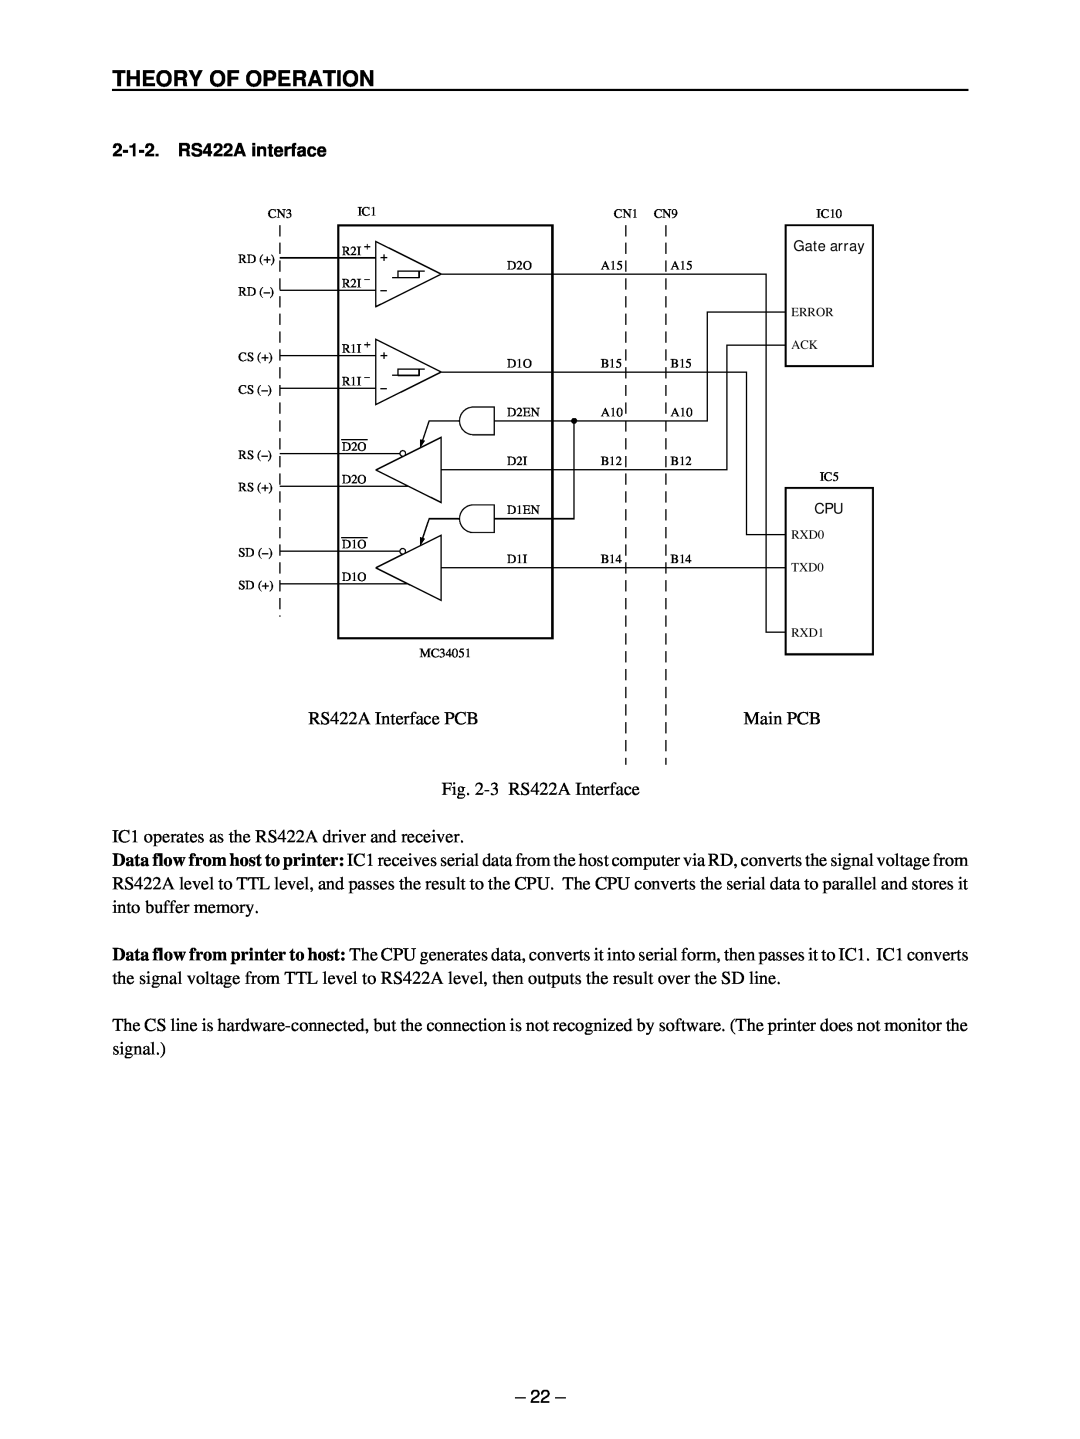 Star Micronics TSP400 technical manual Theory Of Operation, 2-1-2. RS422A interface 